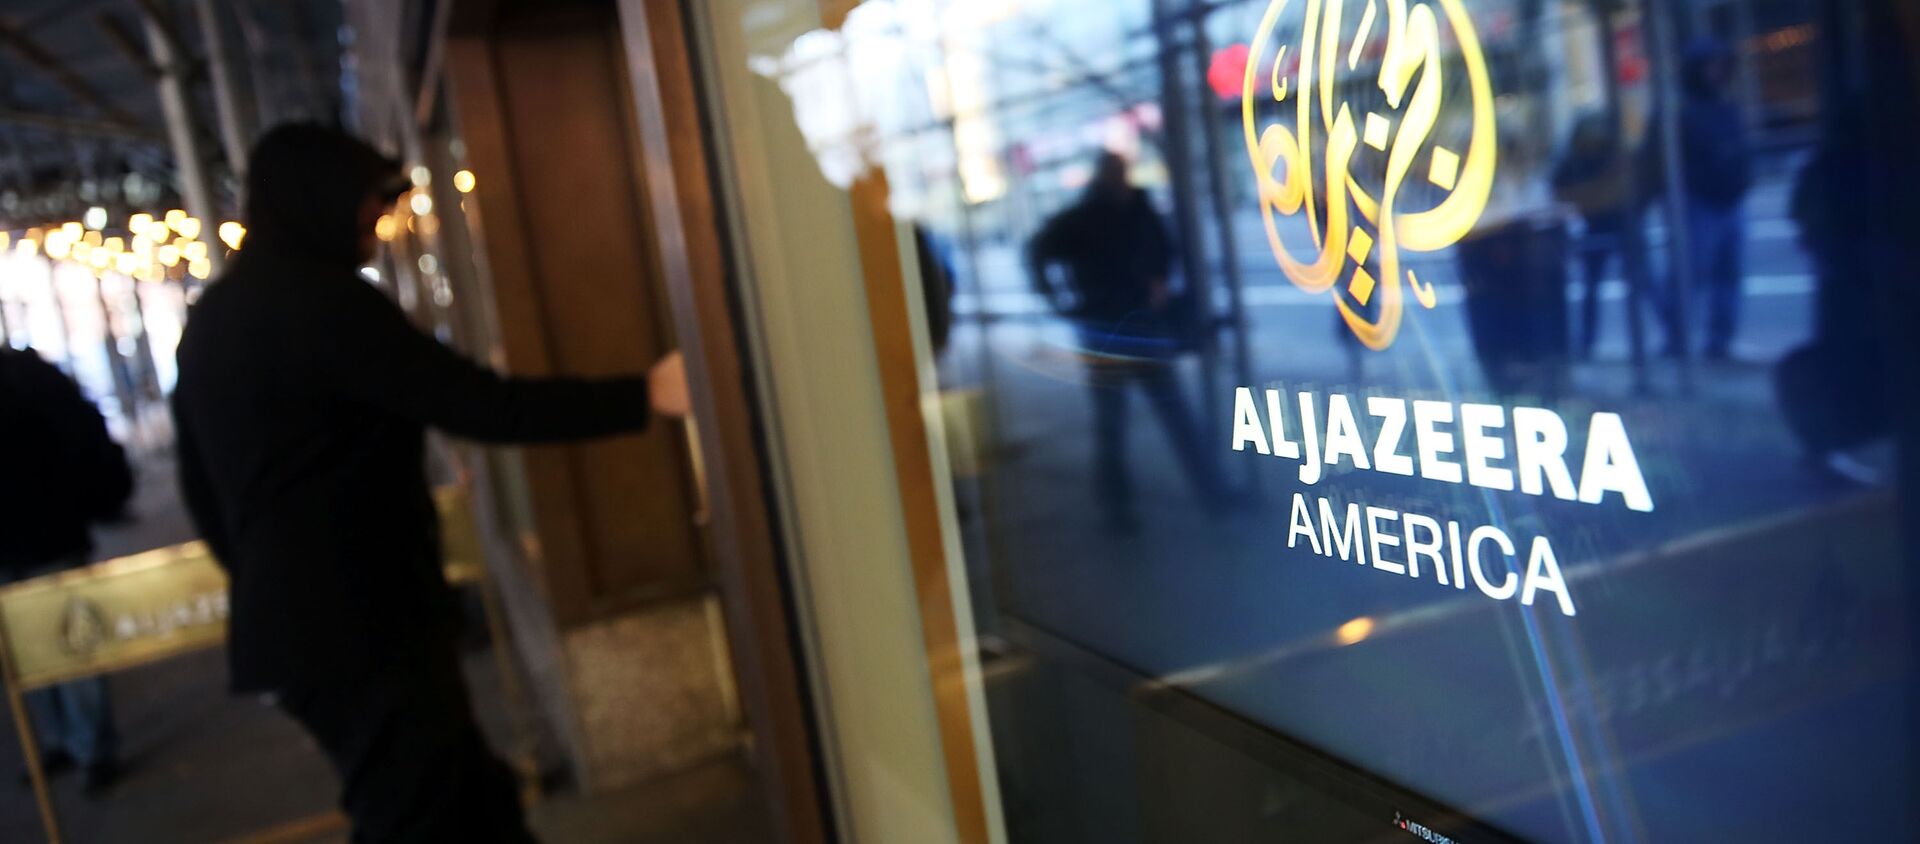 NEW YORK, NY - JANUARY 13: The logo for Al Jazeera America is displayed outside of the cable news channel's offices on January 13, 2016 in New York City. Al Jazeera America, which debuted in August 2013, announced today that they are shutting down. - Sputnik International, 1920, 16.09.2020